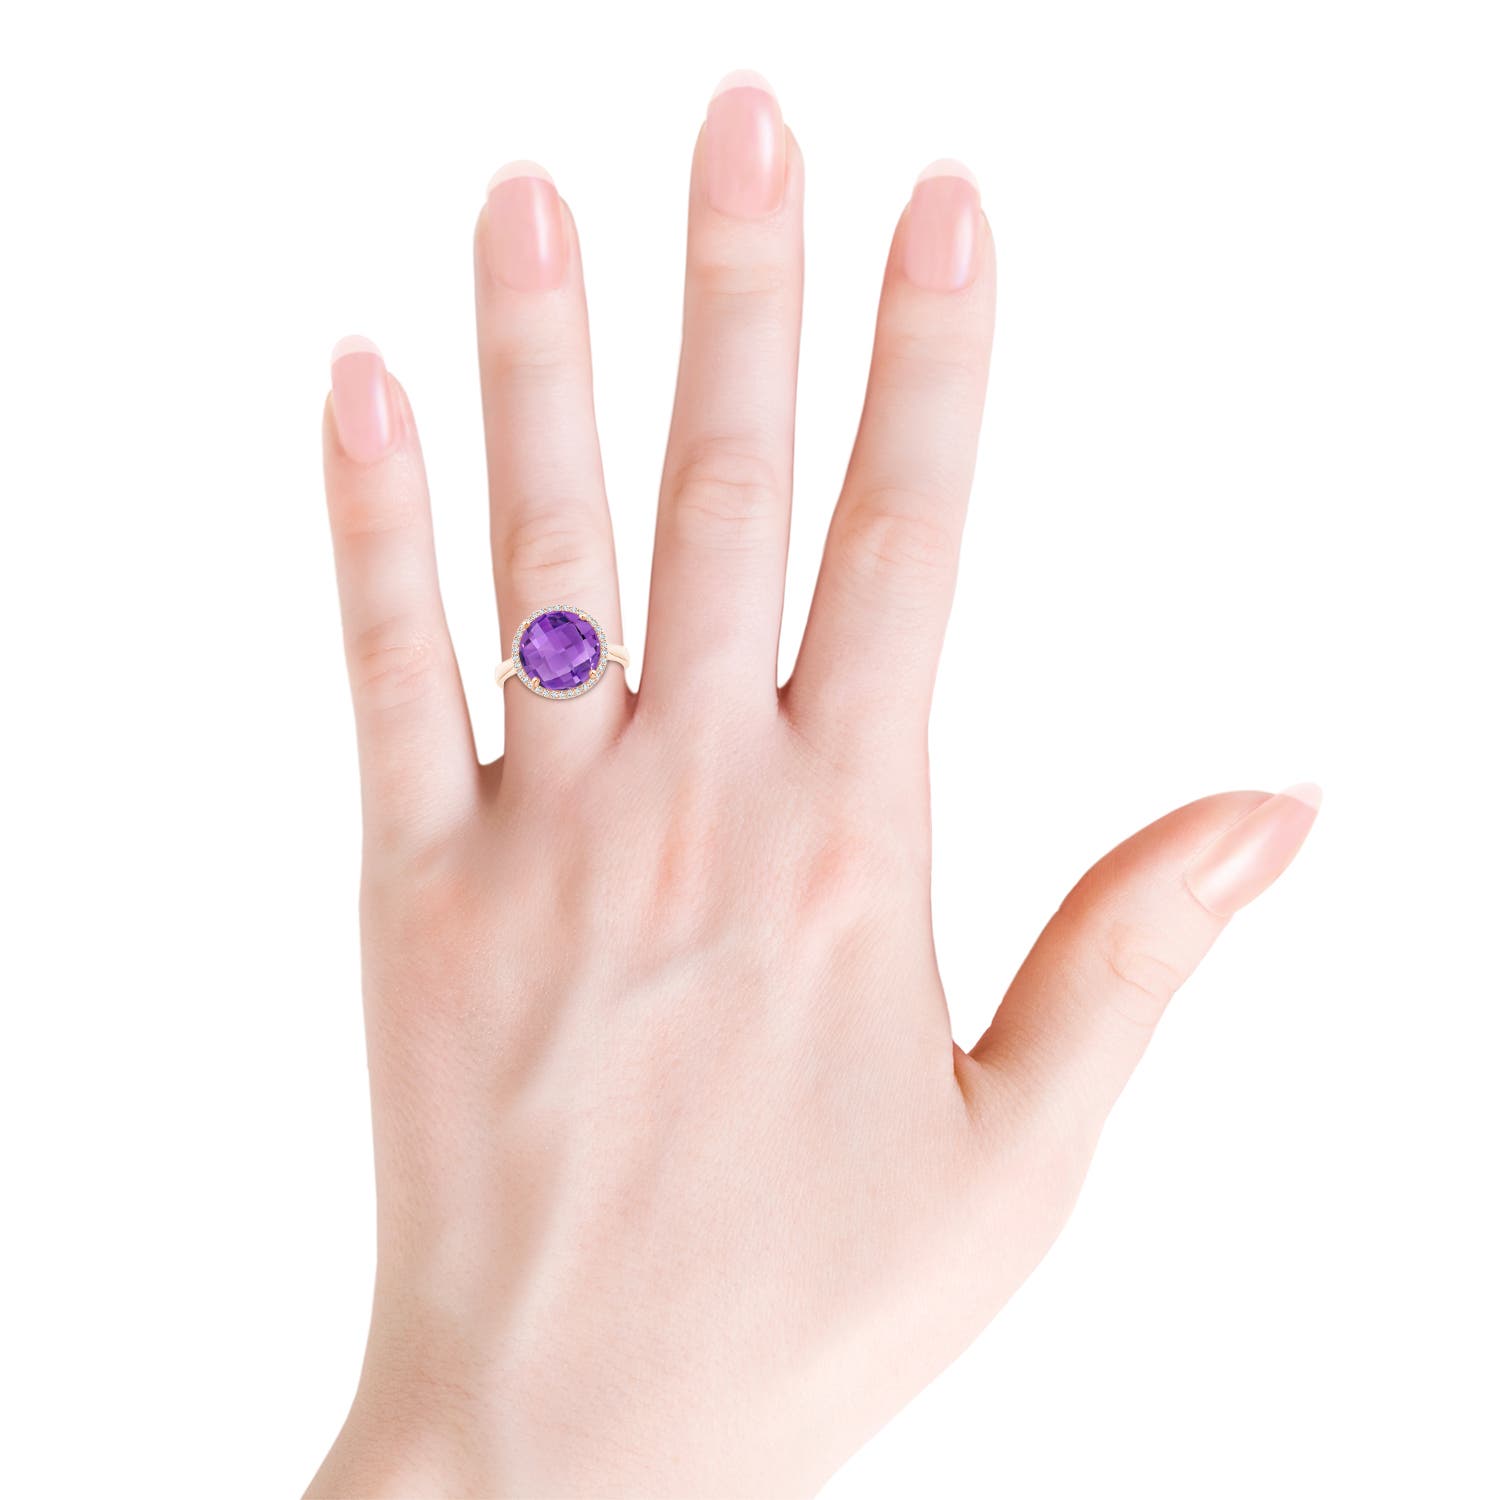 AA - Amethyst / 5.02 CT / 14 KT Rose Gold